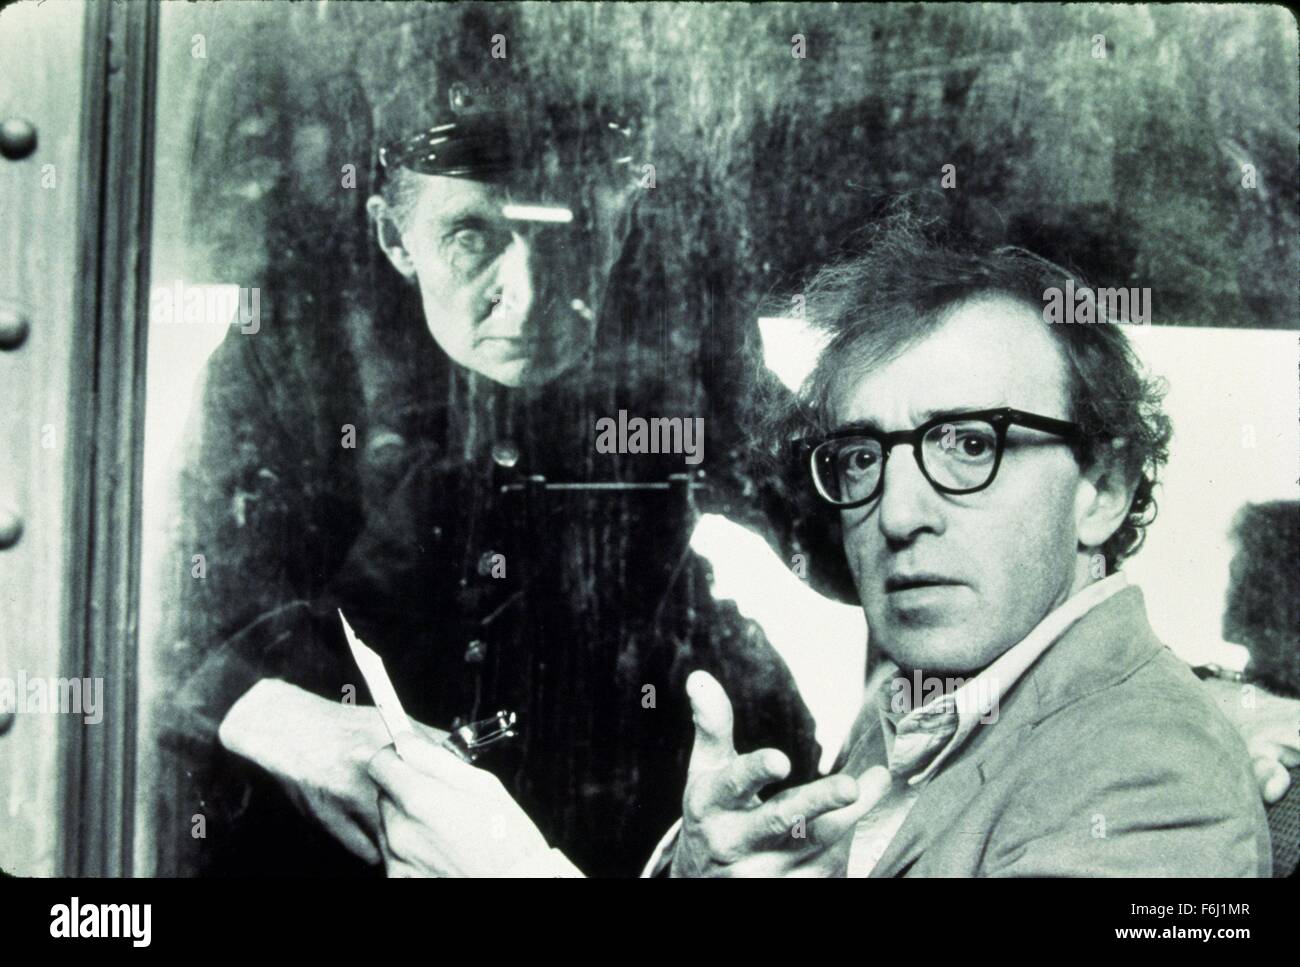 RELEASE DATE: September 26, 1980  MOVIE TITLE: Stardust Memories  STUDIO: United Artists  DIRECTOR: Woody Allen  PLOT: While attending a retrospect of his work, a filmmaker recalls his life and his loves: the inspirations for his films  PICTURED: WOODY ALLEN as Sandy Bates  (Credit Image: c United Artists/Entertainment Pictures) Stock Photo